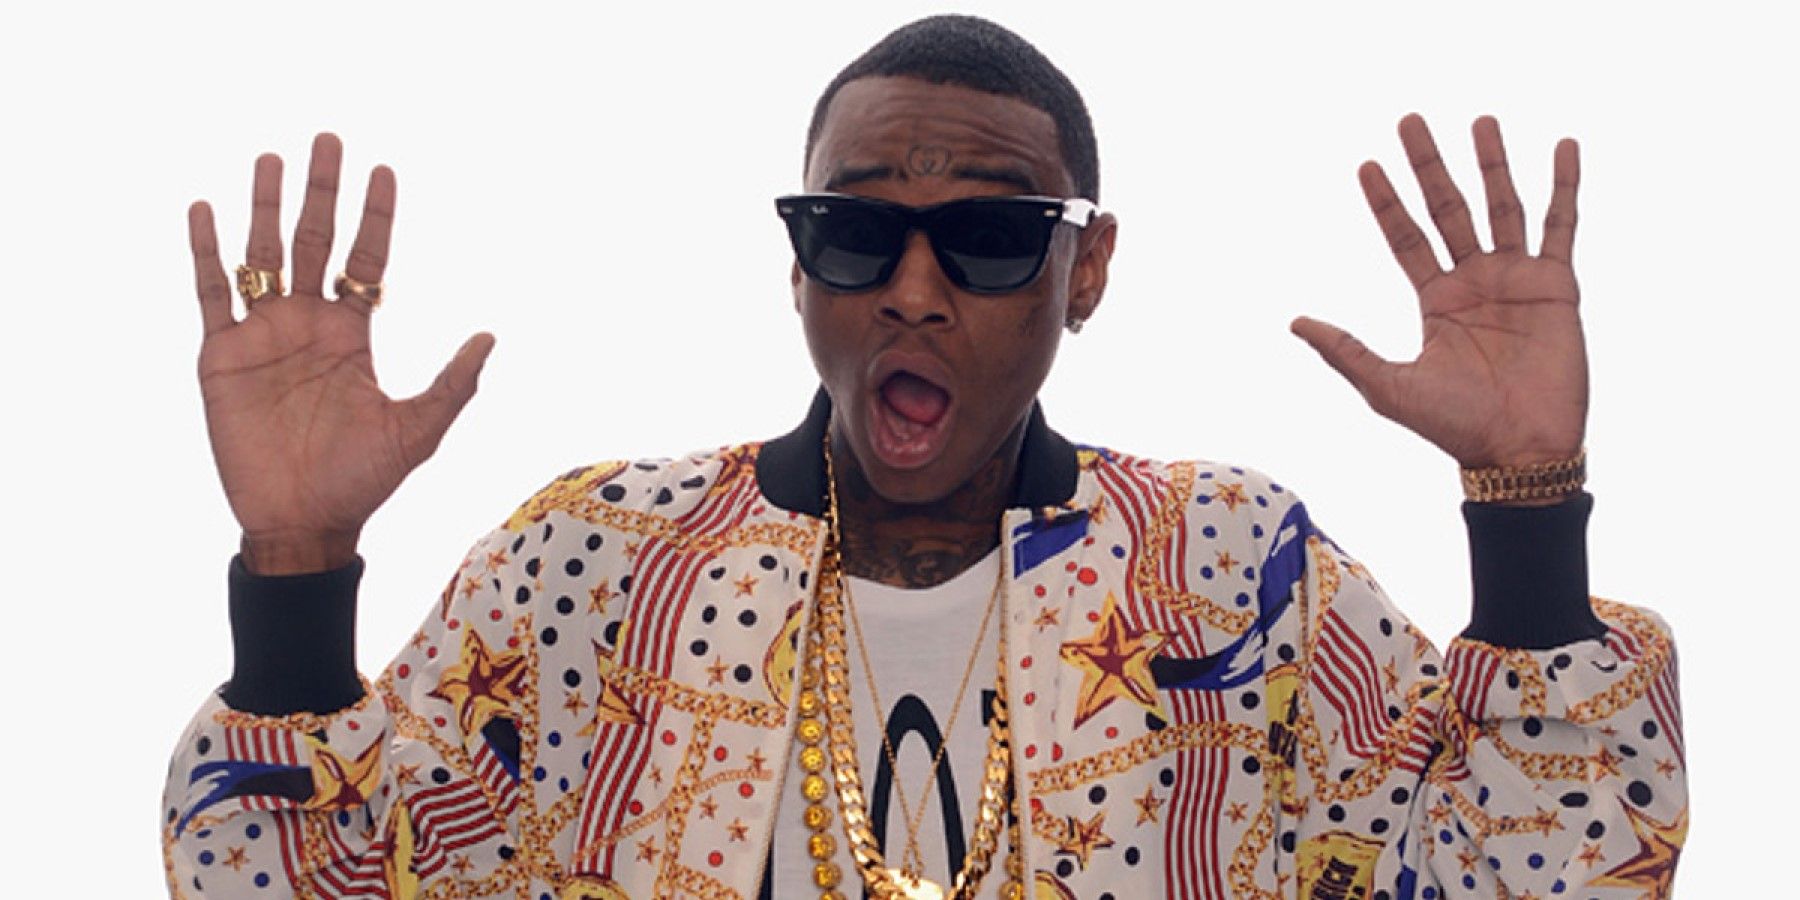 Soulja Boy Has a Wholesome Reaction to Discovering His Iconic Dance in World of Warcraft